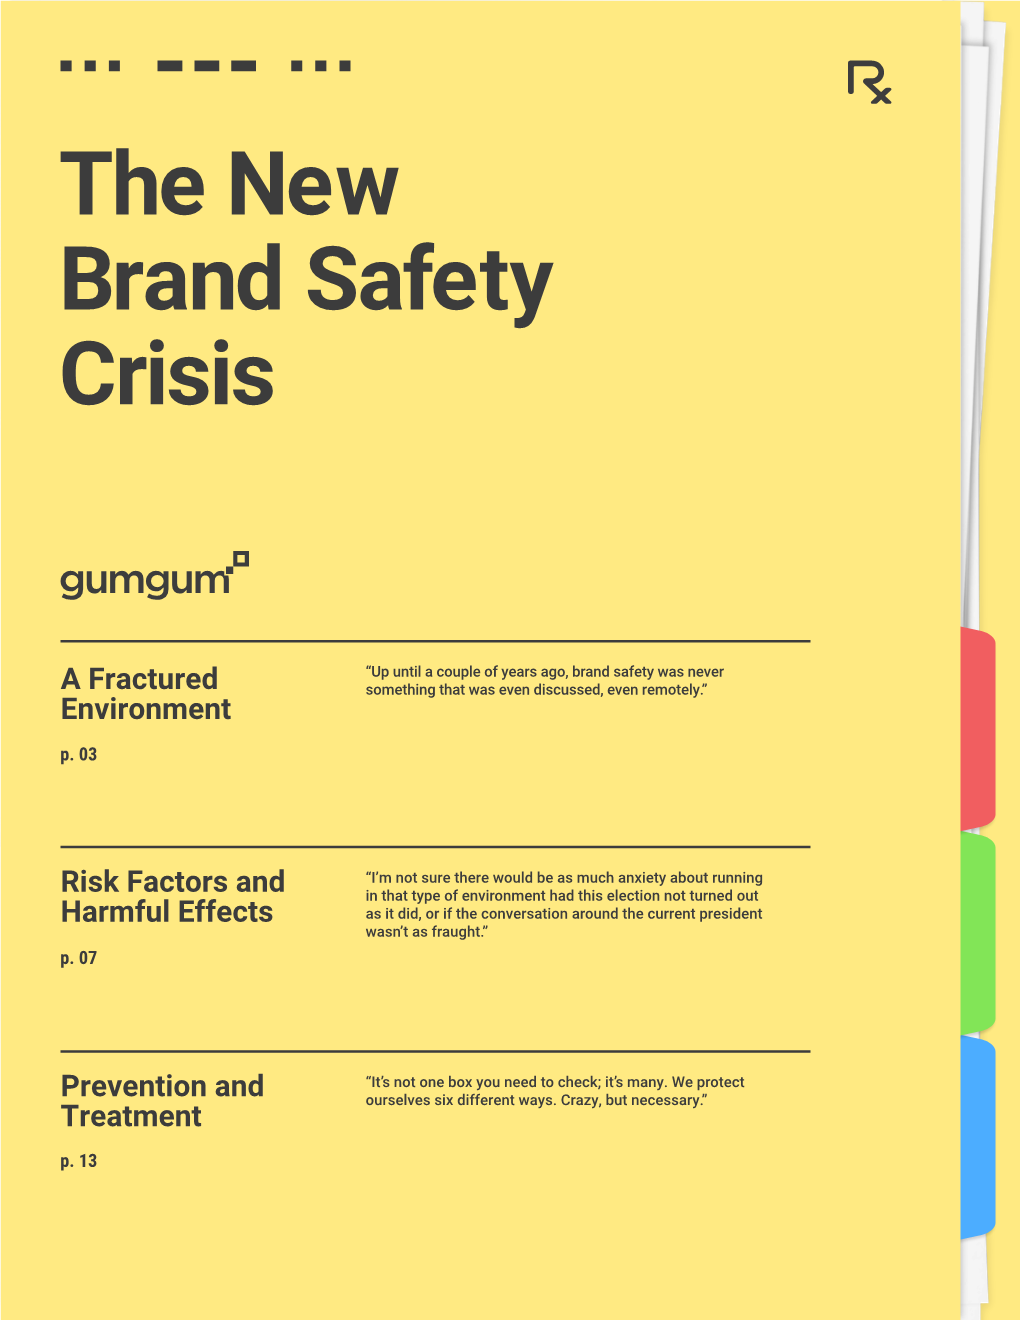 The New Brand Safety Crisis